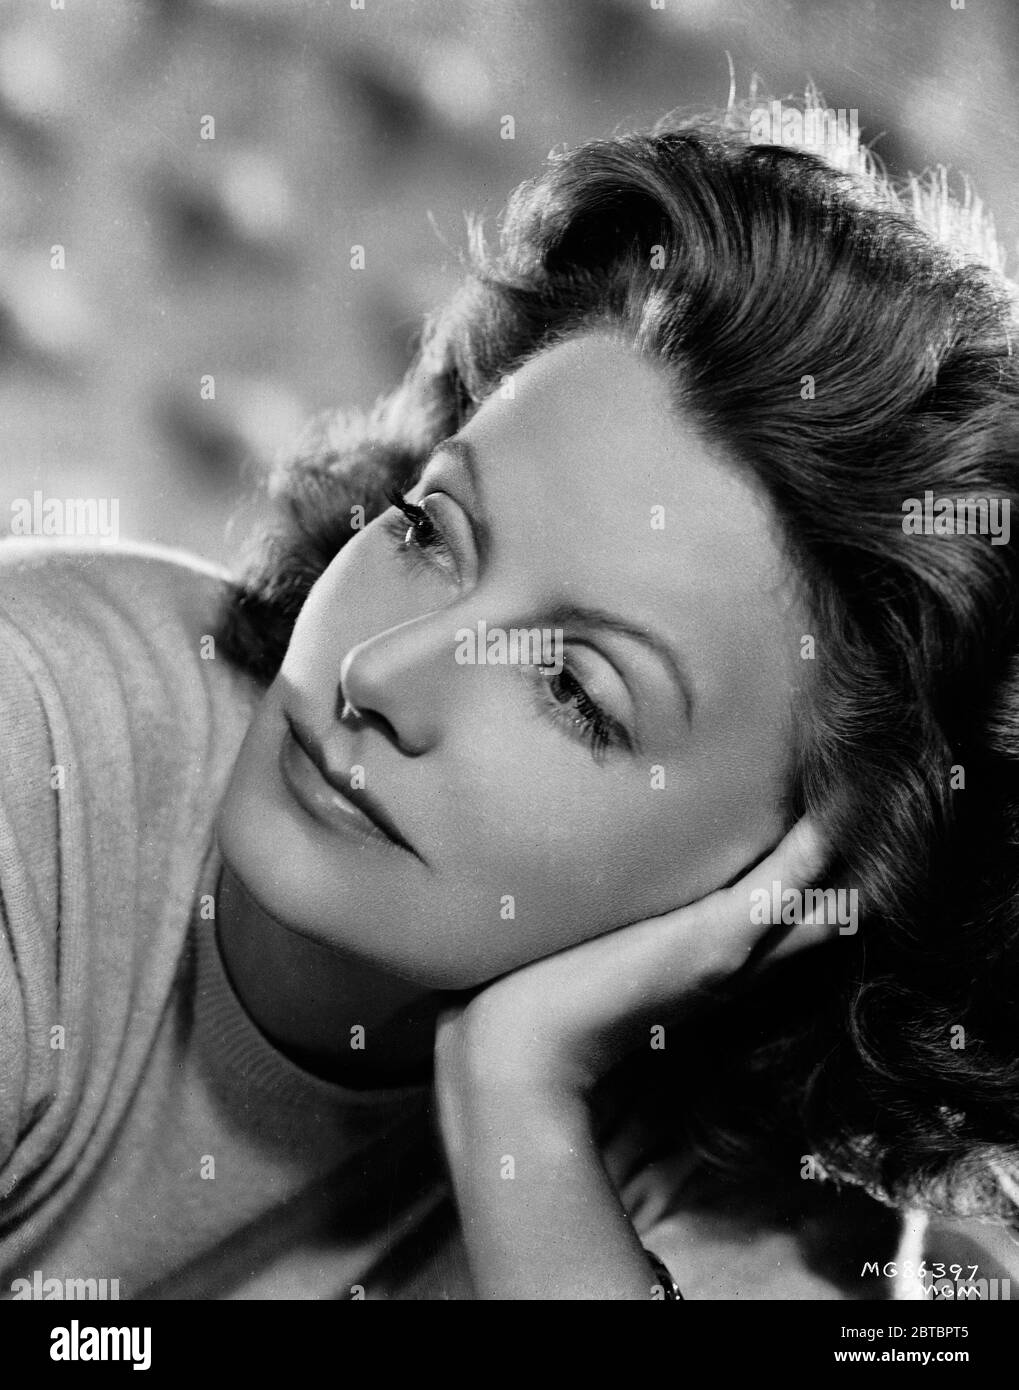 Swedish-born actress Greta Garbo (Retrospective), (born on September 18, 1905, died on April 15 ,1990 at aged 84)    in 'Two Faced Woman' (1941) MGM. Photo by Clarence Sinclair Bull / File Reference # 34000-158THA Stock Photo